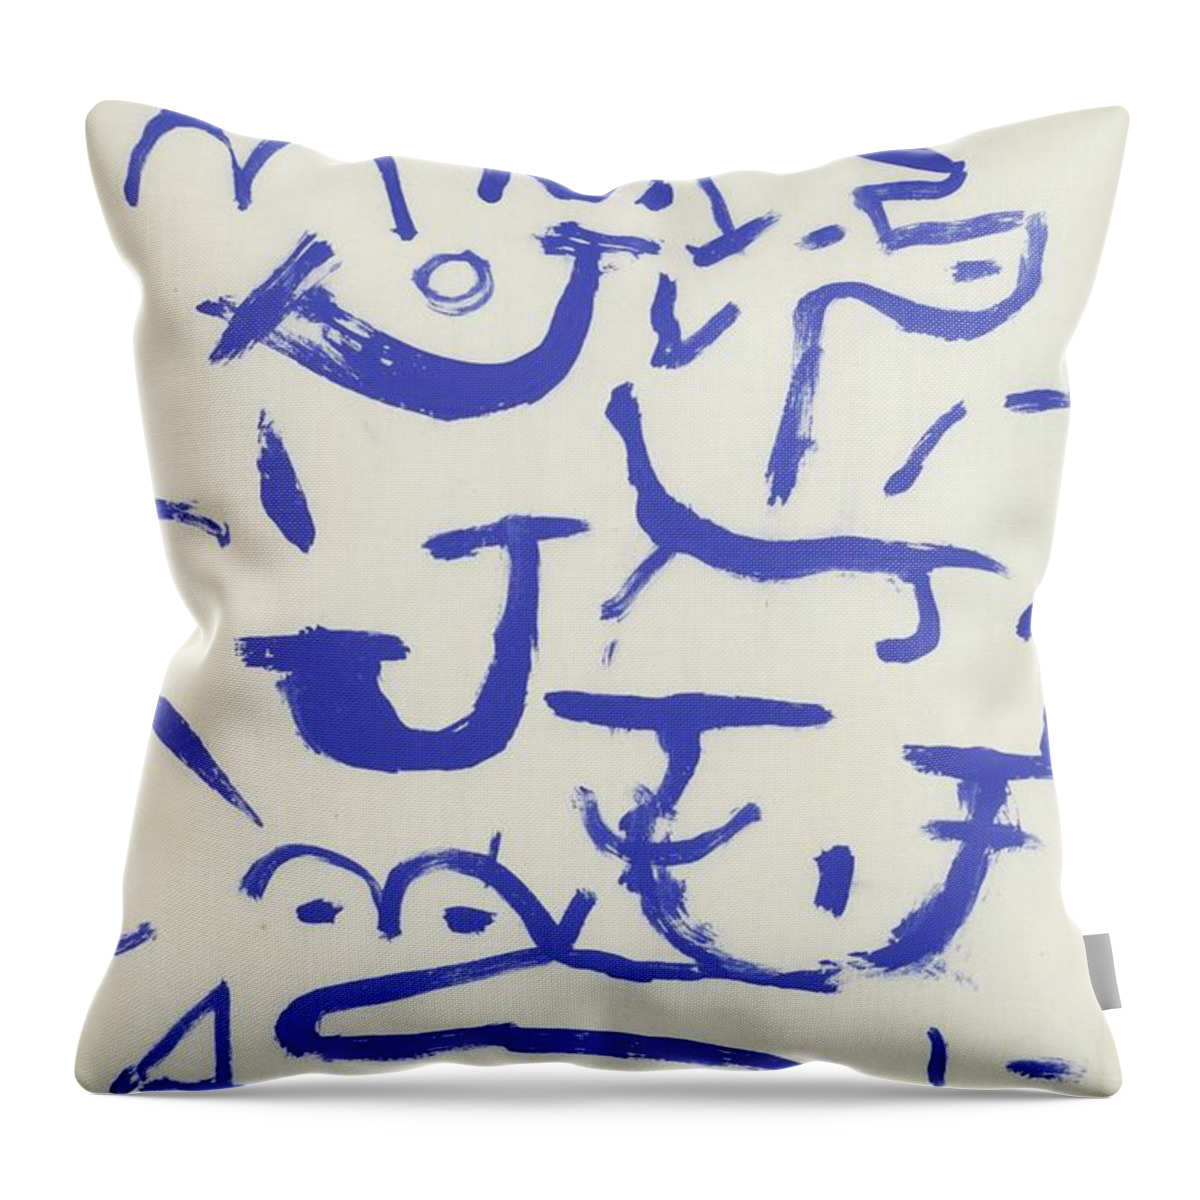 Qvq Throw Pillow featuring the painting Kriechendes Und Baumendes Creeper And Climber, 1937 Blue Gouache by Paul Klee